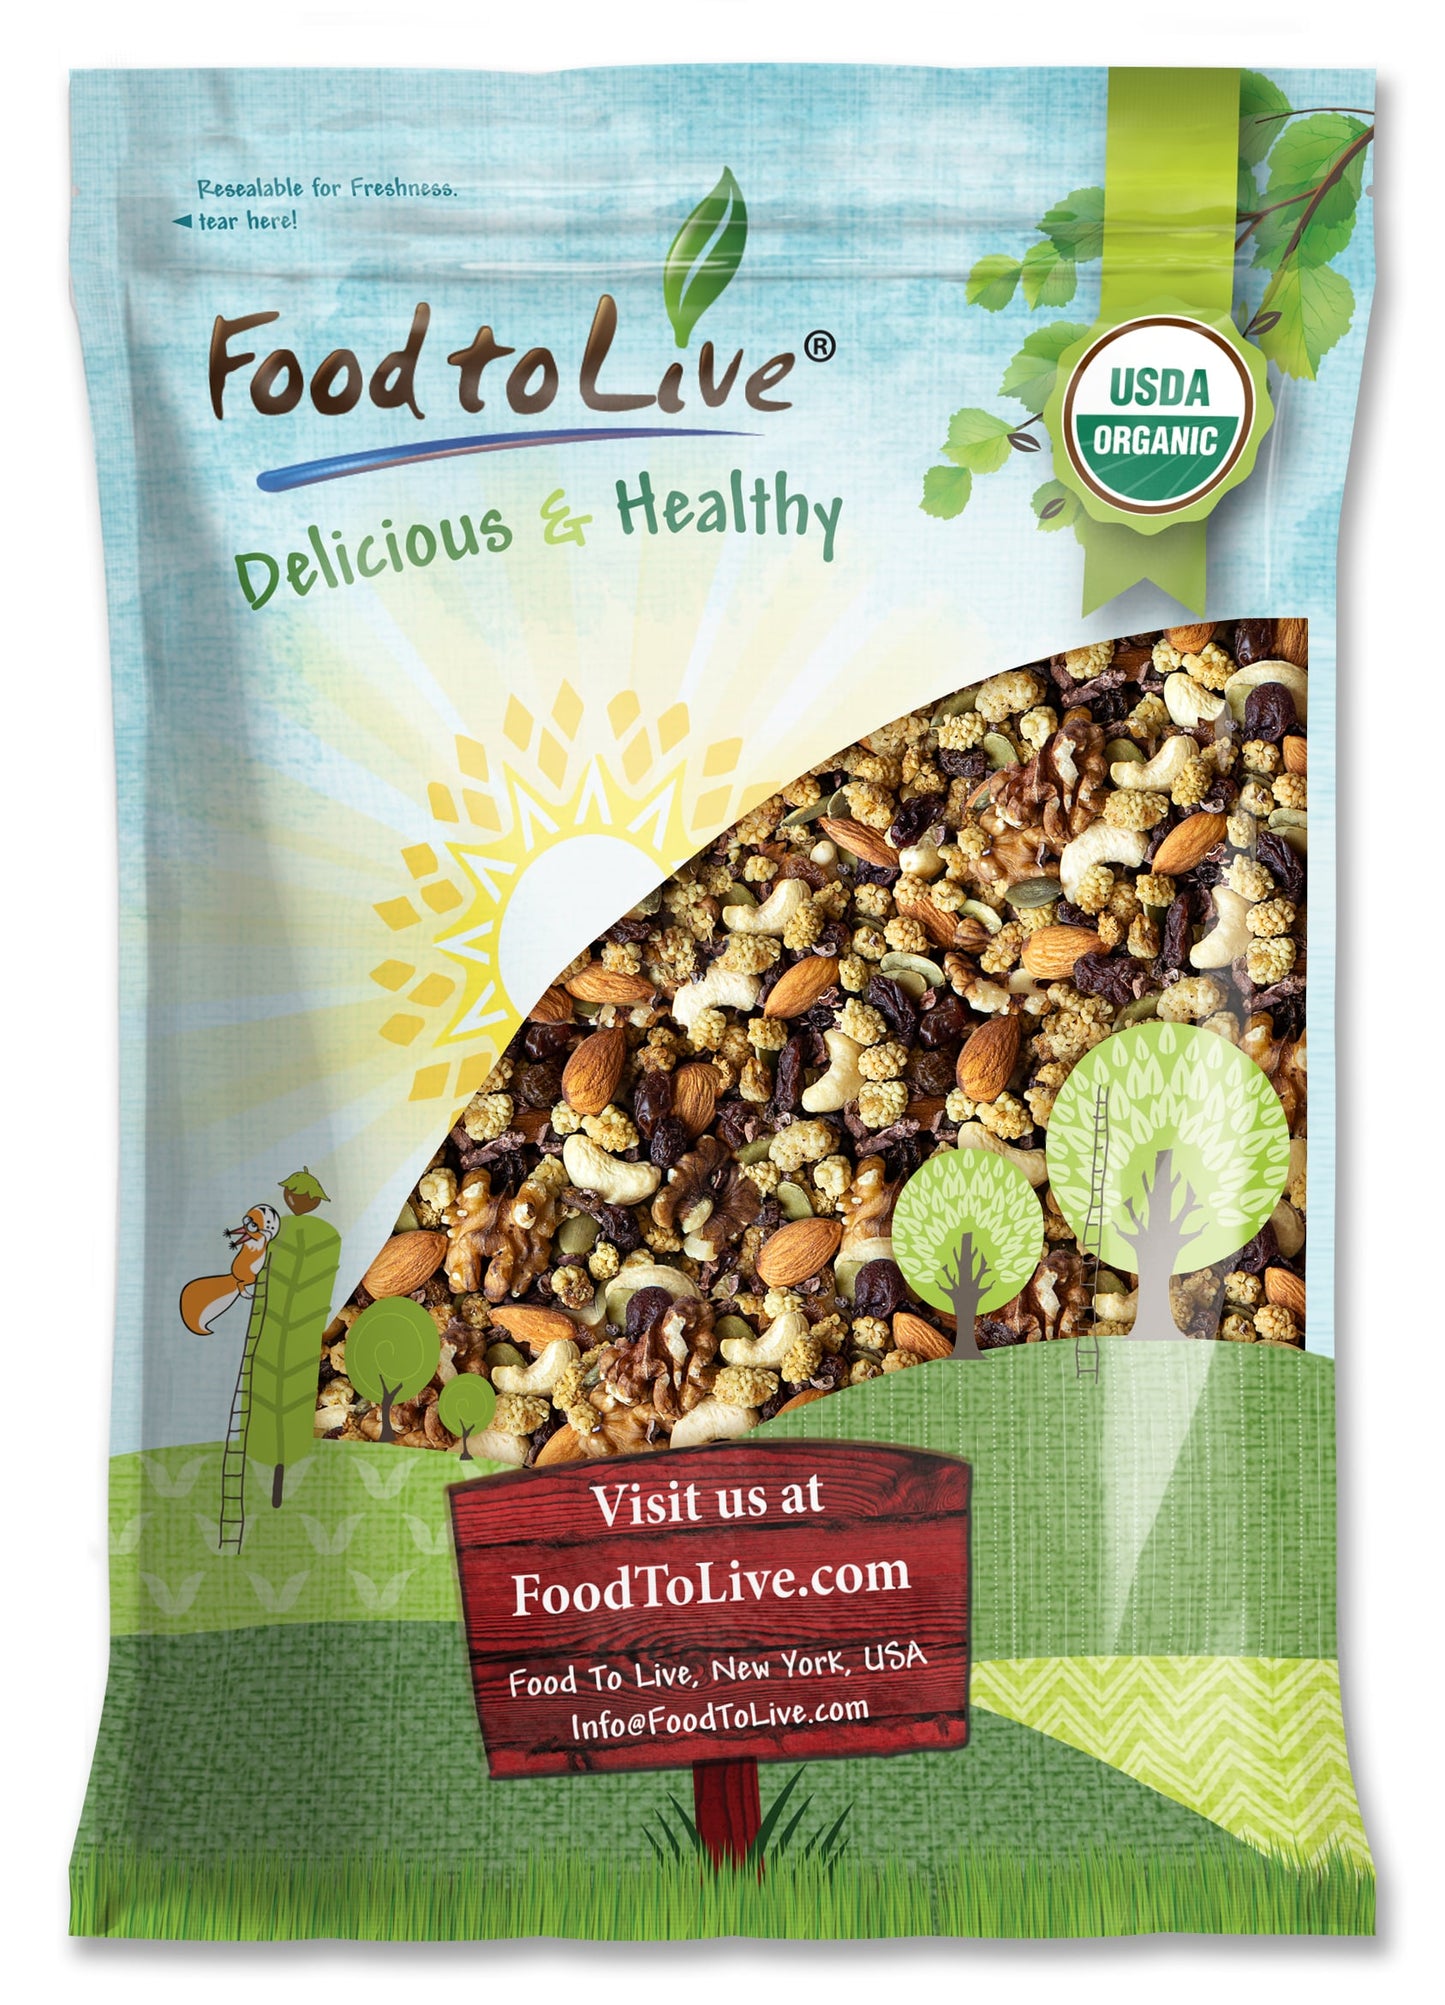 Organic Snack Wise Trail Mix — Non-GMO, Cacao Nibs, Raisins, Almonds, Cashews, Walnuts, Mulberries, Pumpkin Seeds. Kosher - by Food to Live